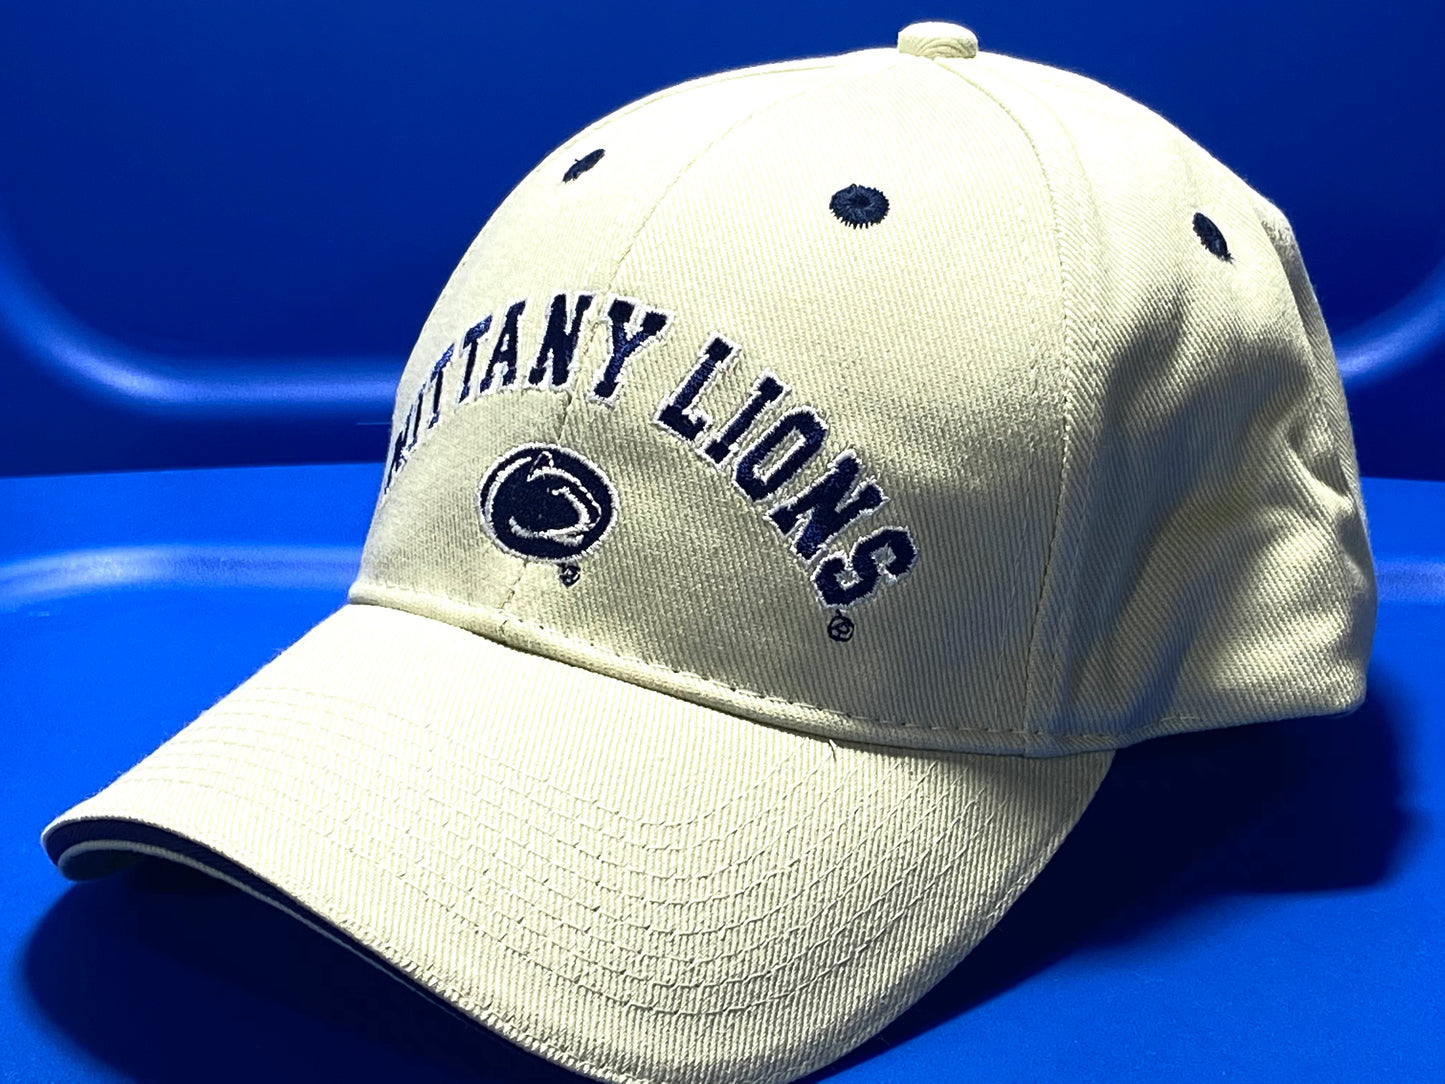 Penn State Nittany Lions Vintage Adult NCAA Cotton Logo Cap by Drew Pearson